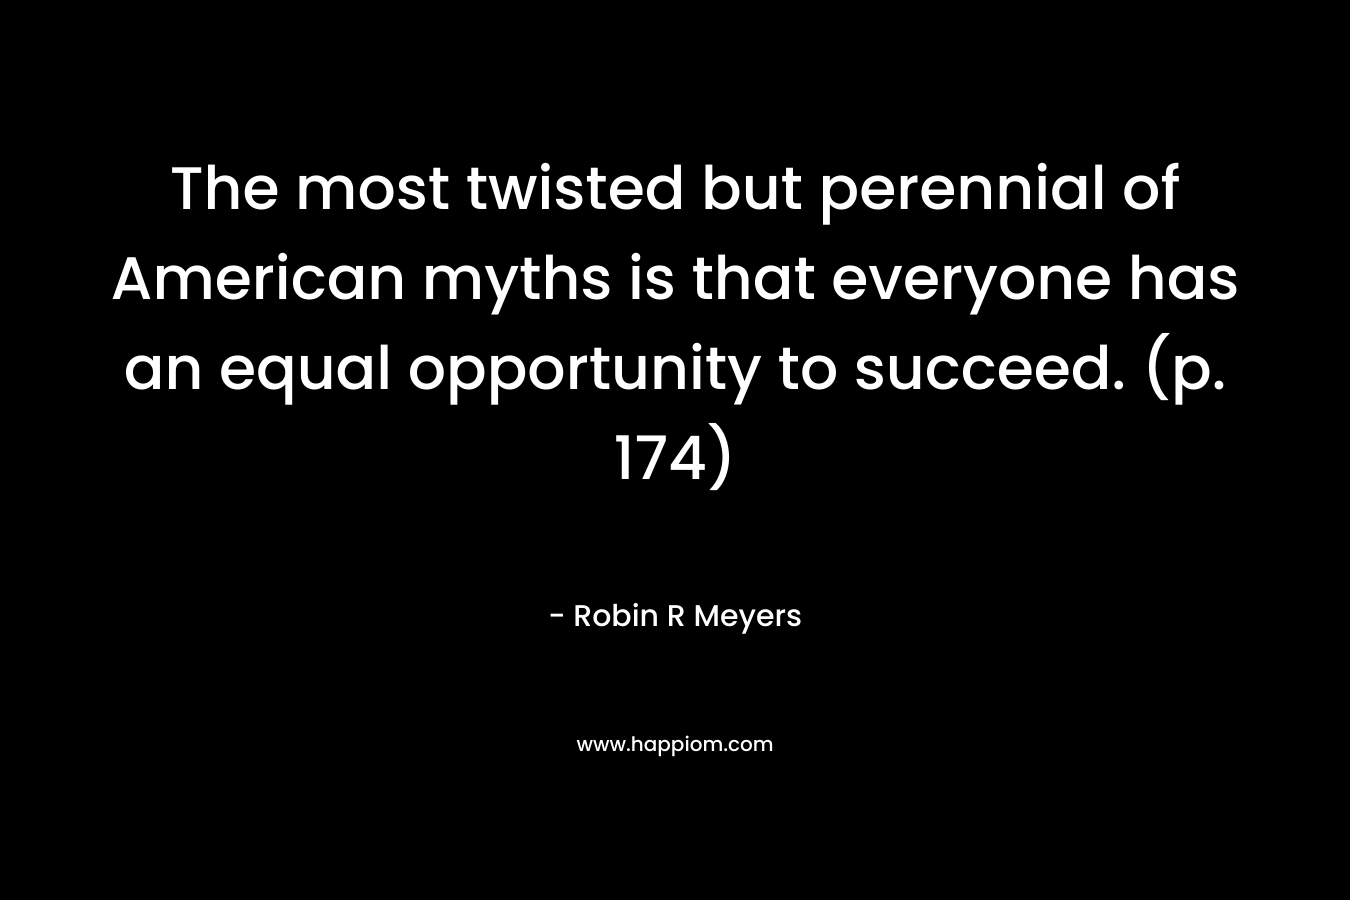 The most twisted but perennial of American myths is that everyone has an equal opportunity to succeed. (p. 174)